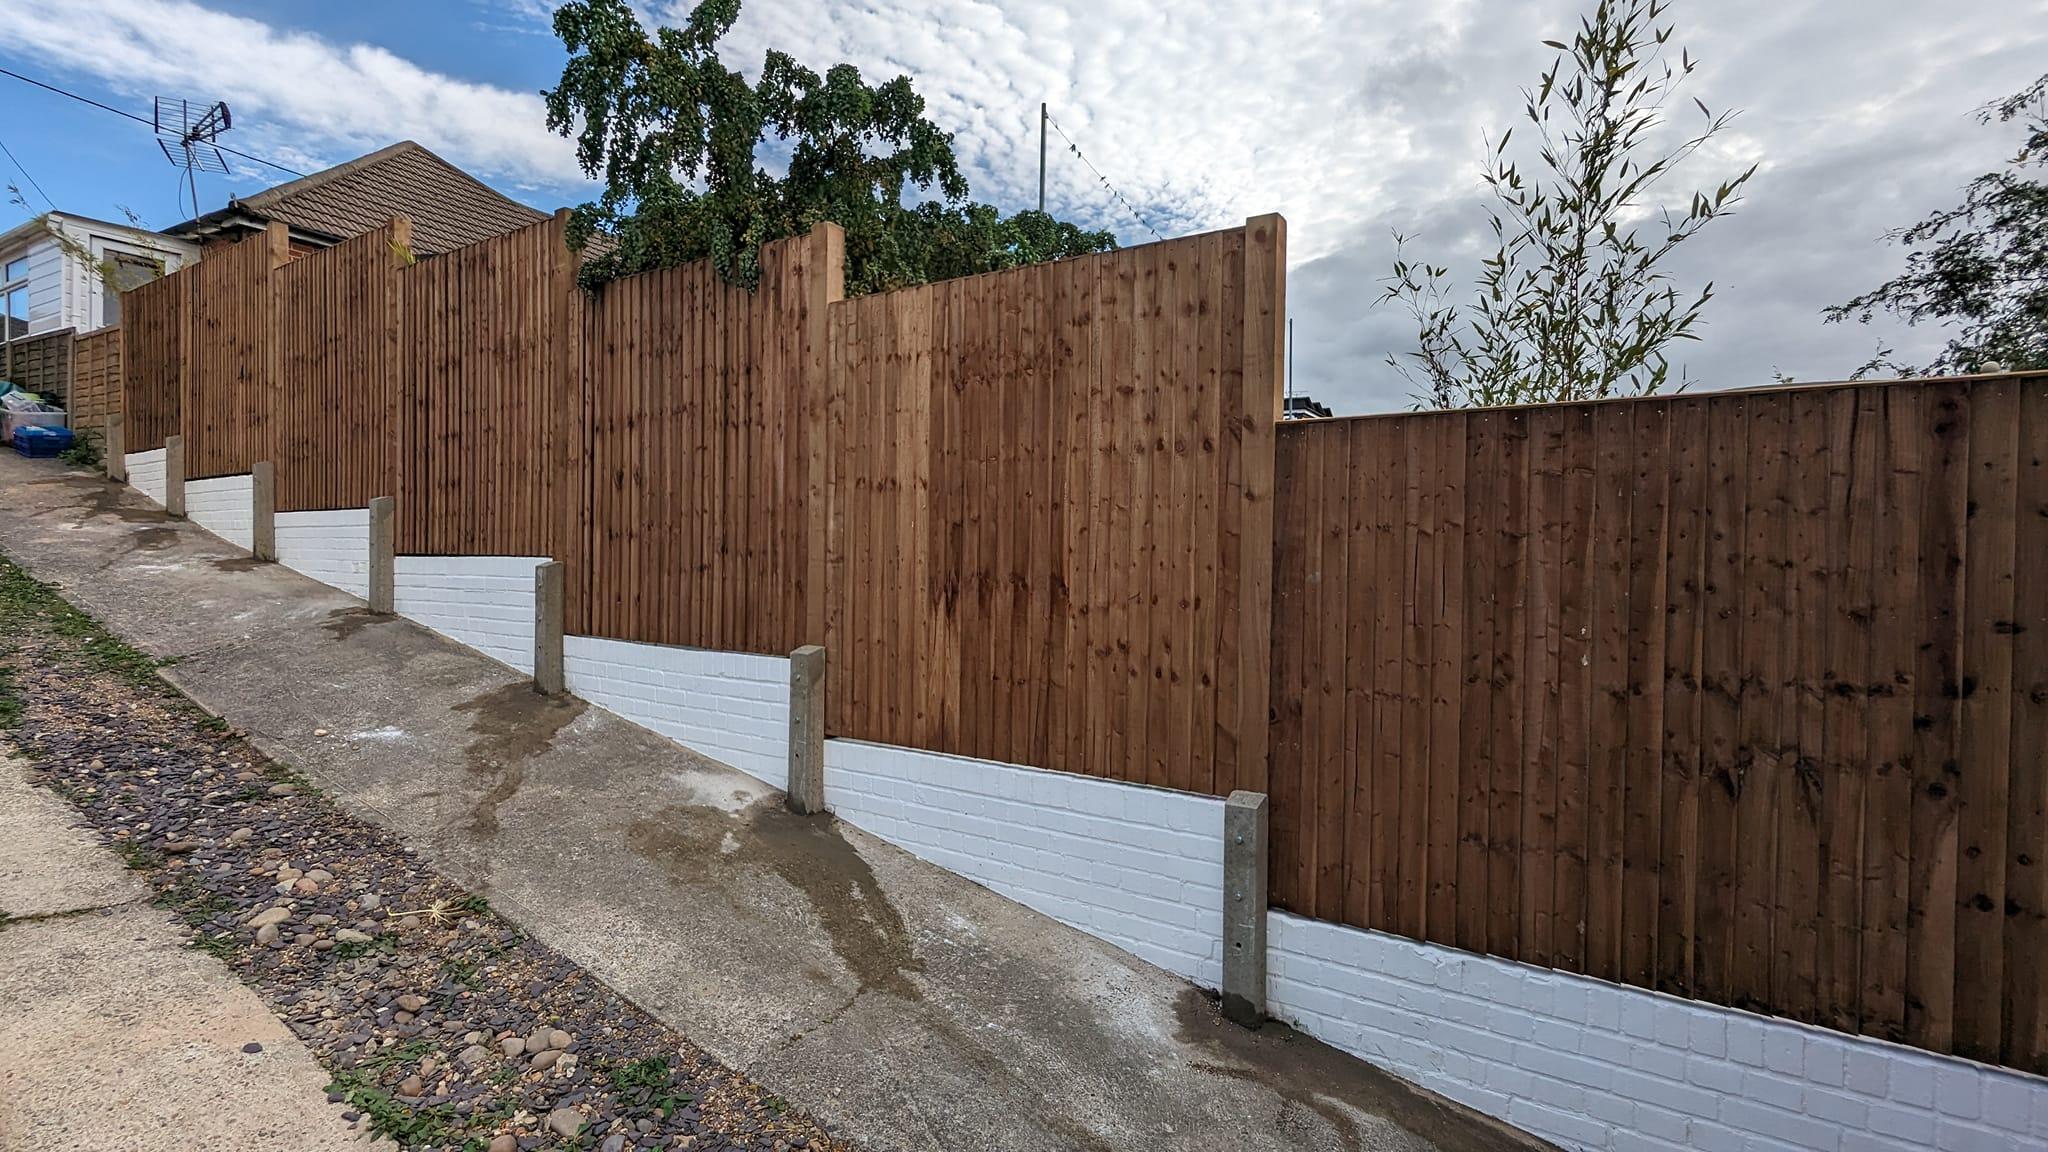 Fencing in Lordswood, closeboard panels and wooden posts.